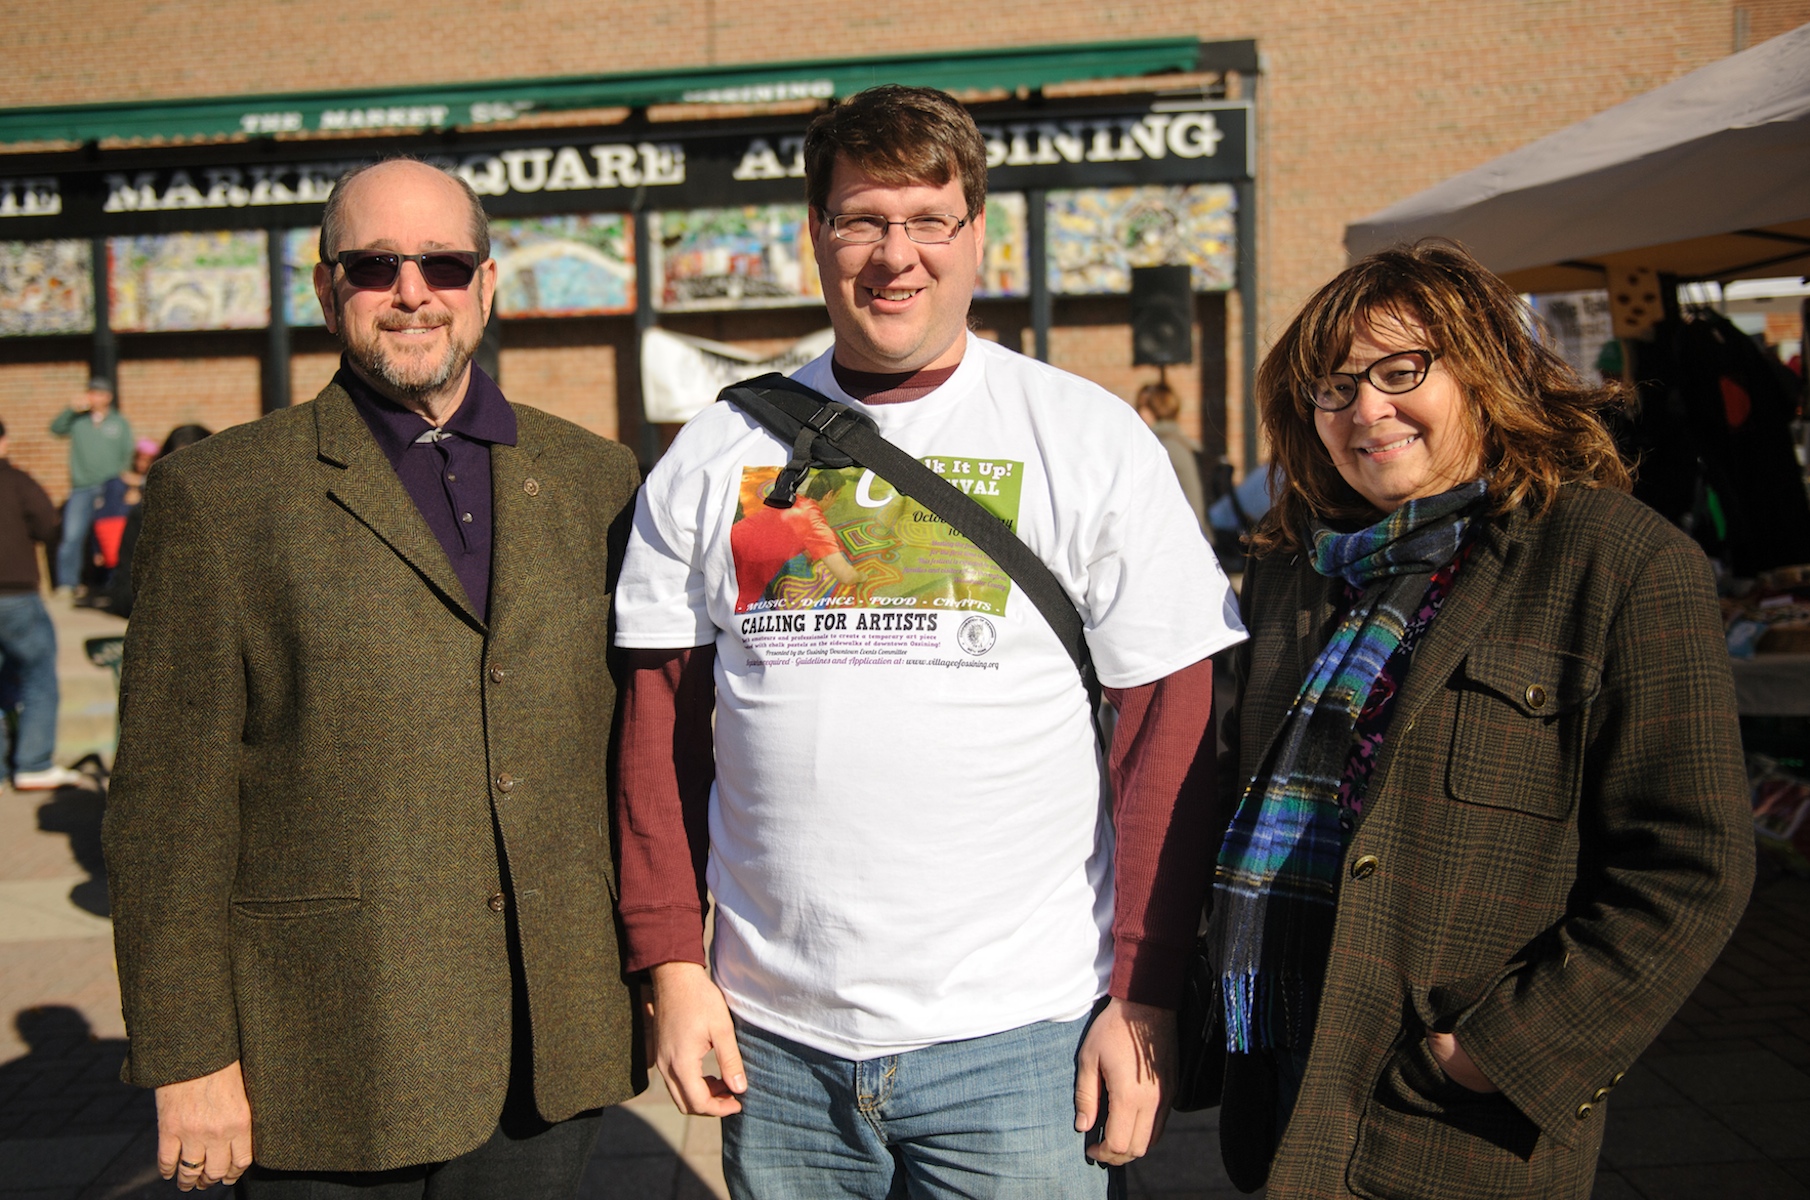 Village of Ossining Mayor William Hanauer; Bradley Morrison, Downtown Events Committee member and Director of Cultural Arts at the Ossining School District; and children’s illustrator Rose Mary Berlin